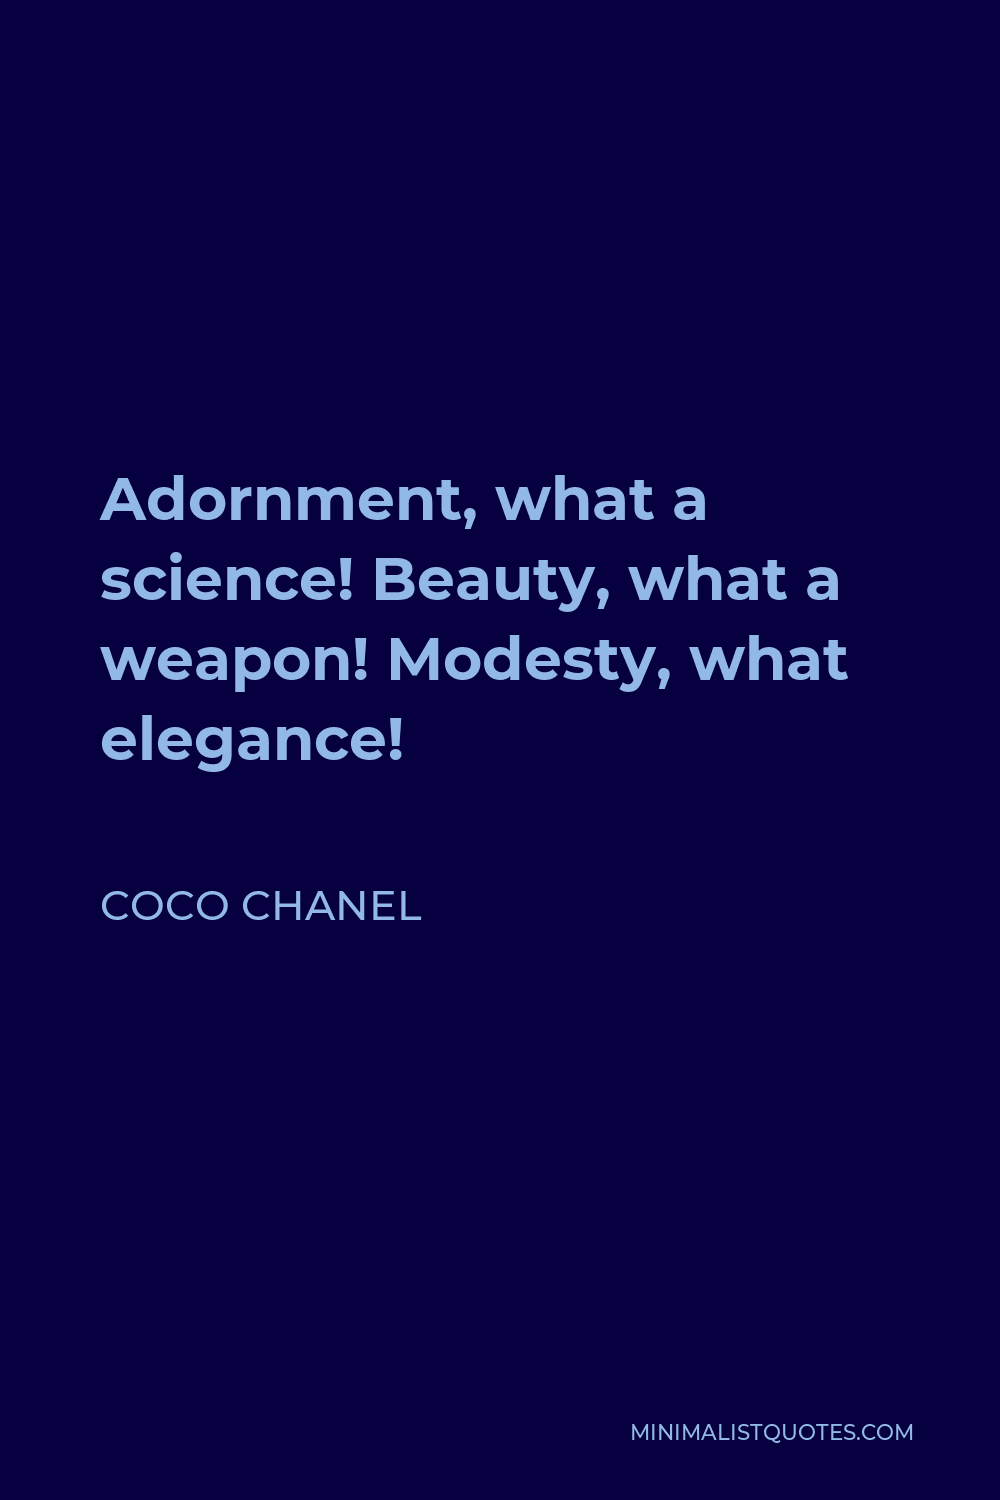 Coco Chanel Quote - Adornment, what a science! Beauty, what a weapon! Modesty, what elegance!